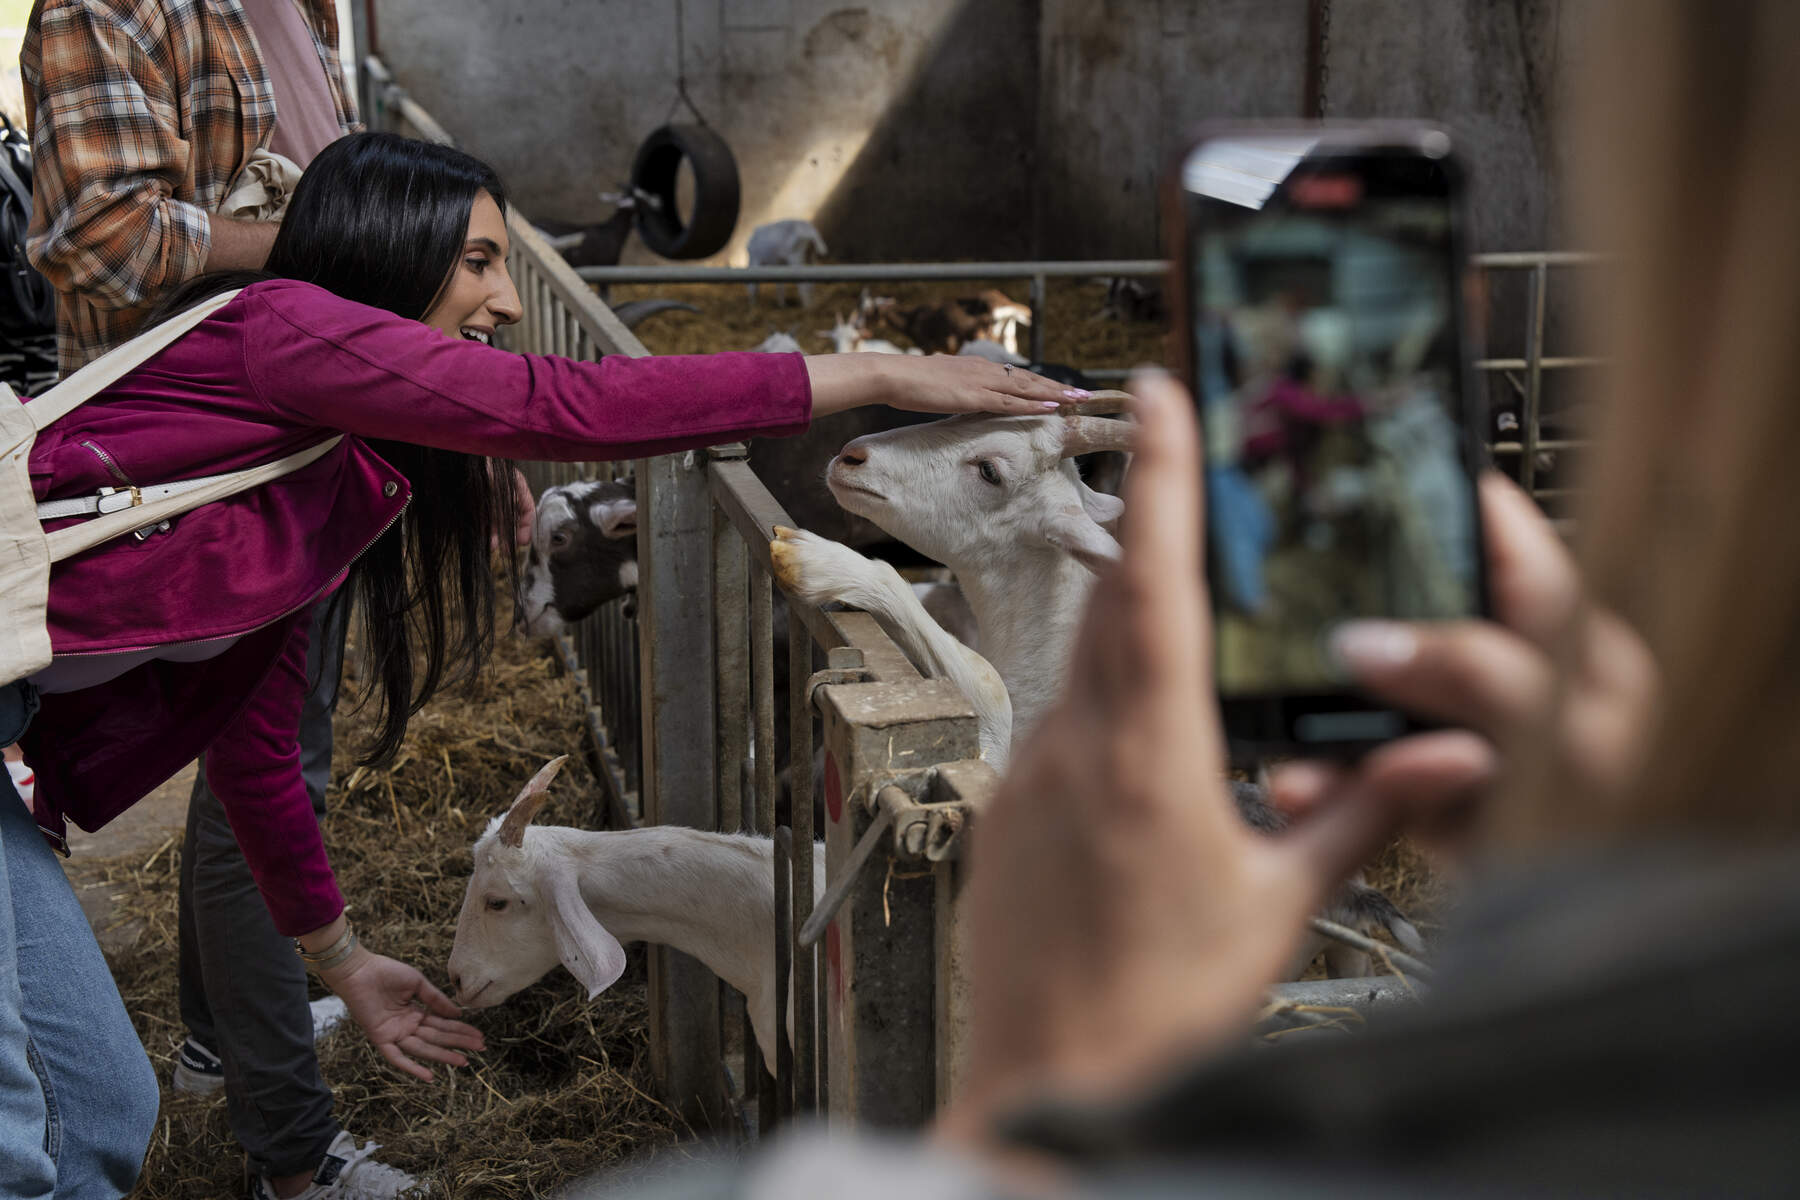 Tourist recording video of her friend with a goat